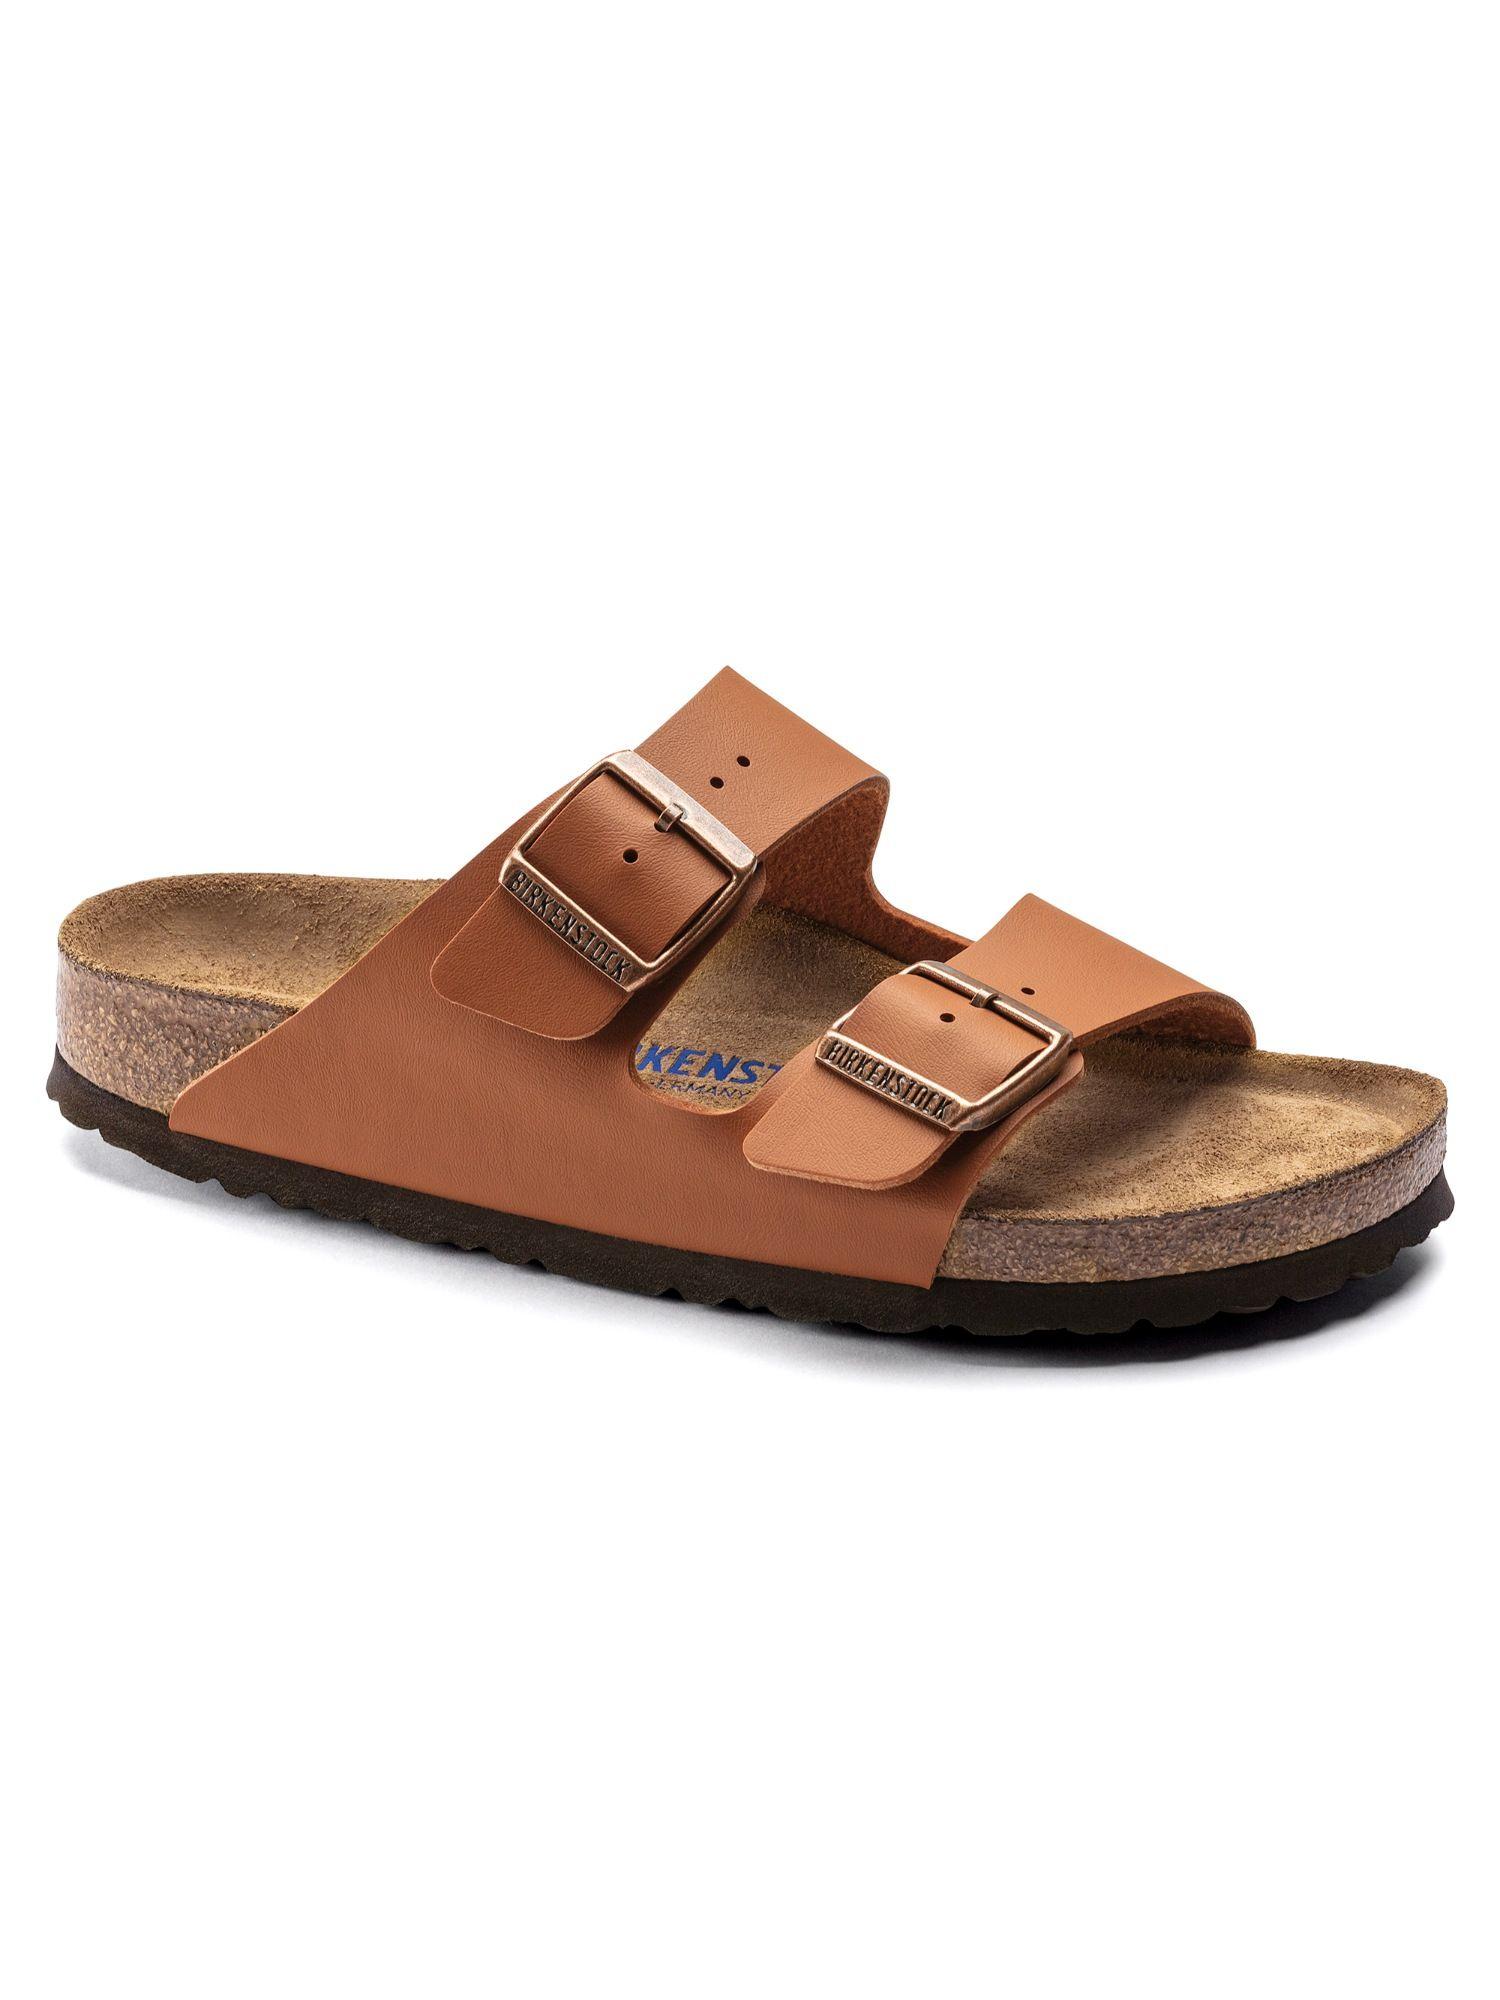 Arizona Soft Footbed Solid Brown Narrow Width Unisex Two-strap Sandals